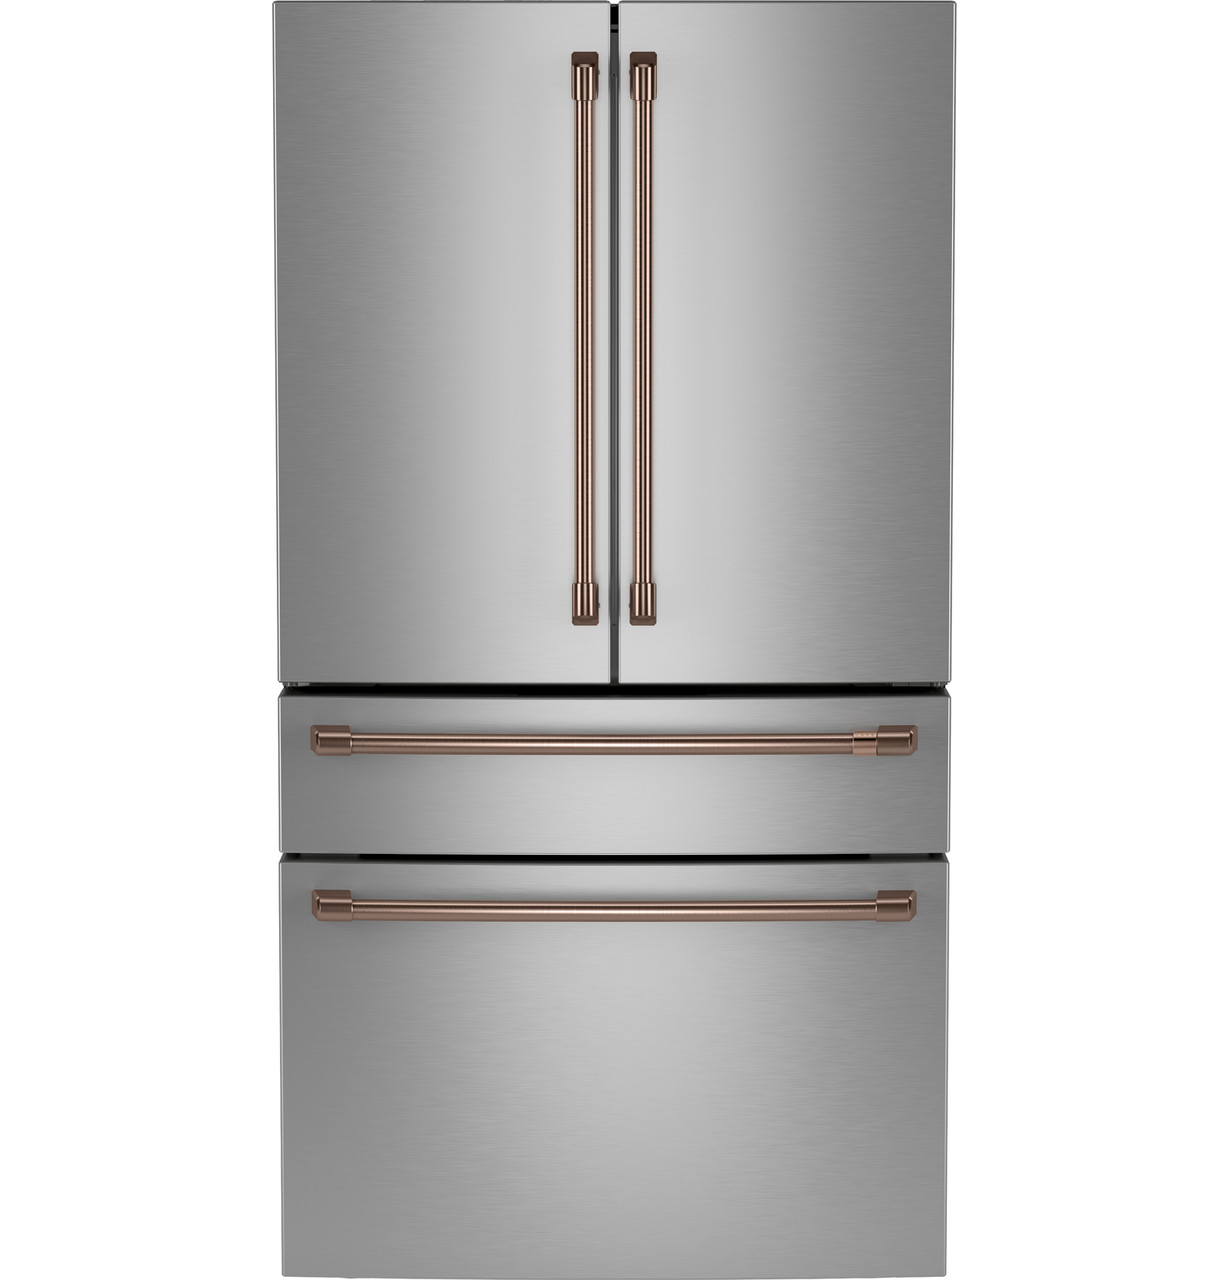 Café™ ENERGY STAR® 28.7 Cu. Ft. Smart 4-Door French-Door Refrigerator in  Platinum Glass With Dual-Dispense AutoFill Pitcher - CGE29DM5TS5 - Cafe  Appliances